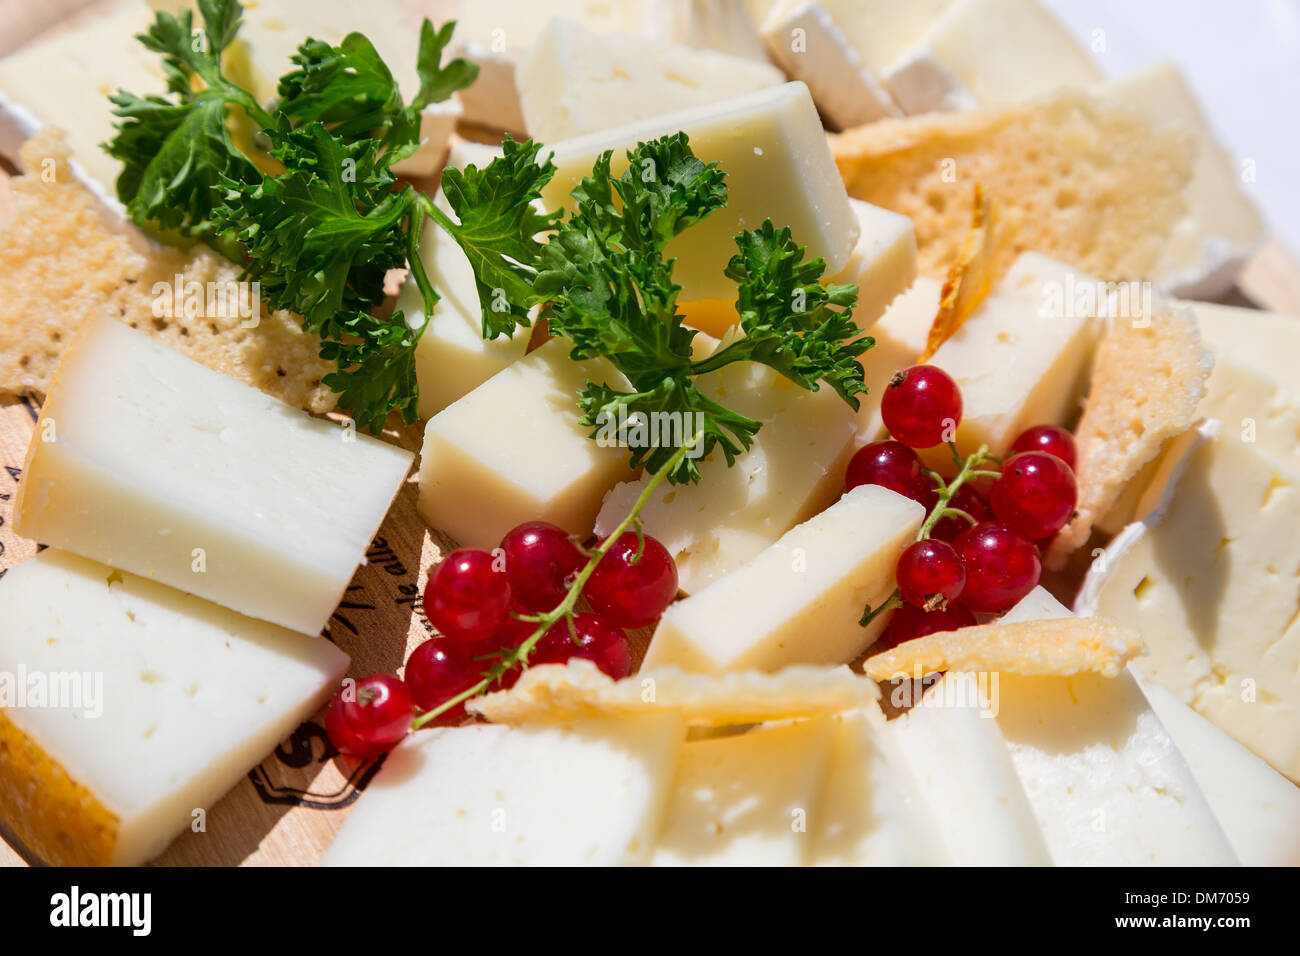 Italy, Valle d'aosta, Food and drink, cheese Stock Photo